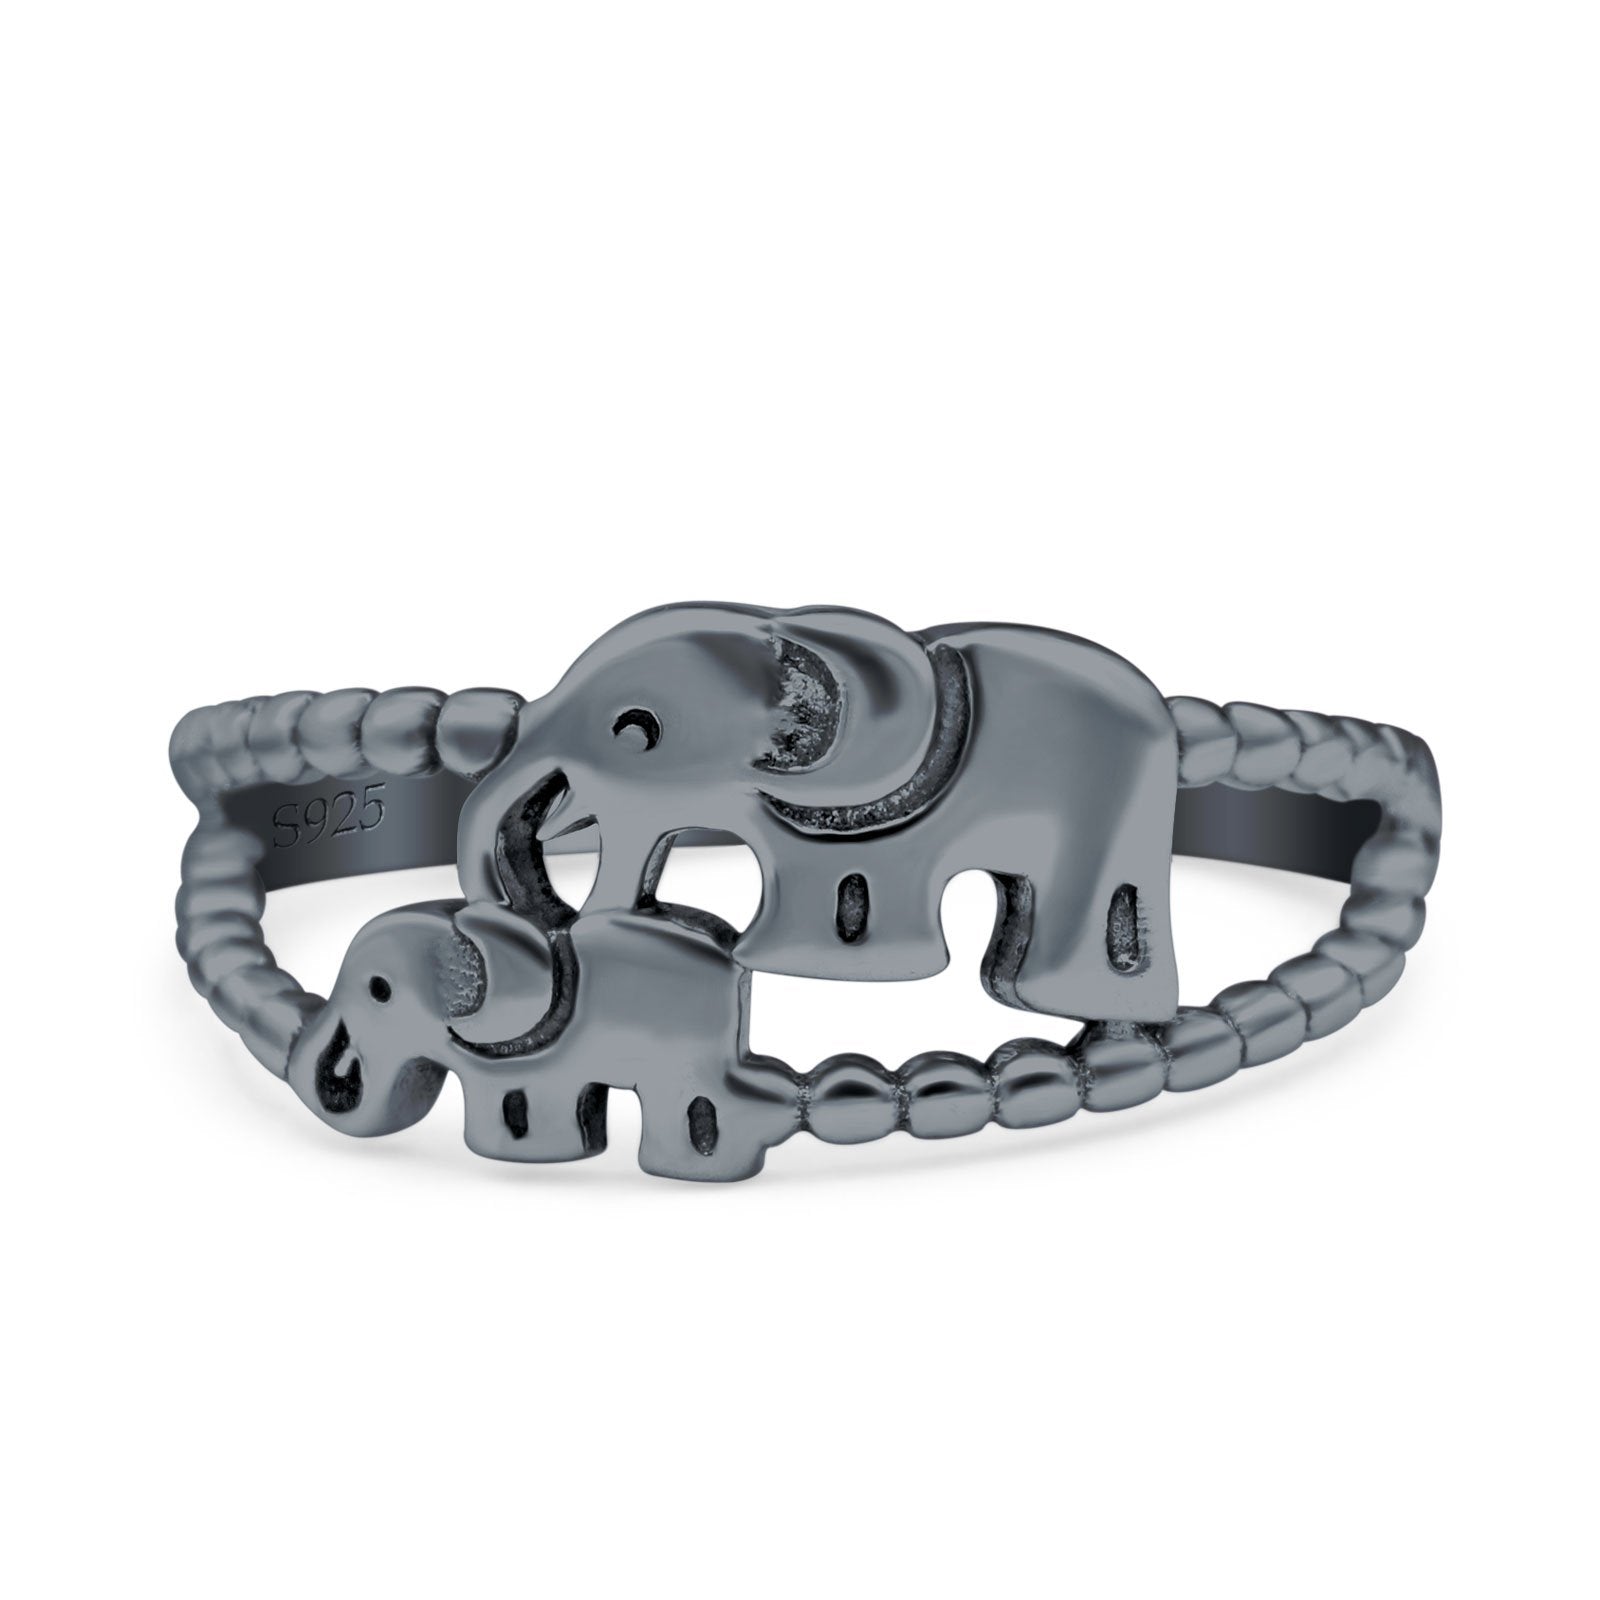 Mama and Baby Elephant Oxidized Solid 925 Sterling Silver (9mm)